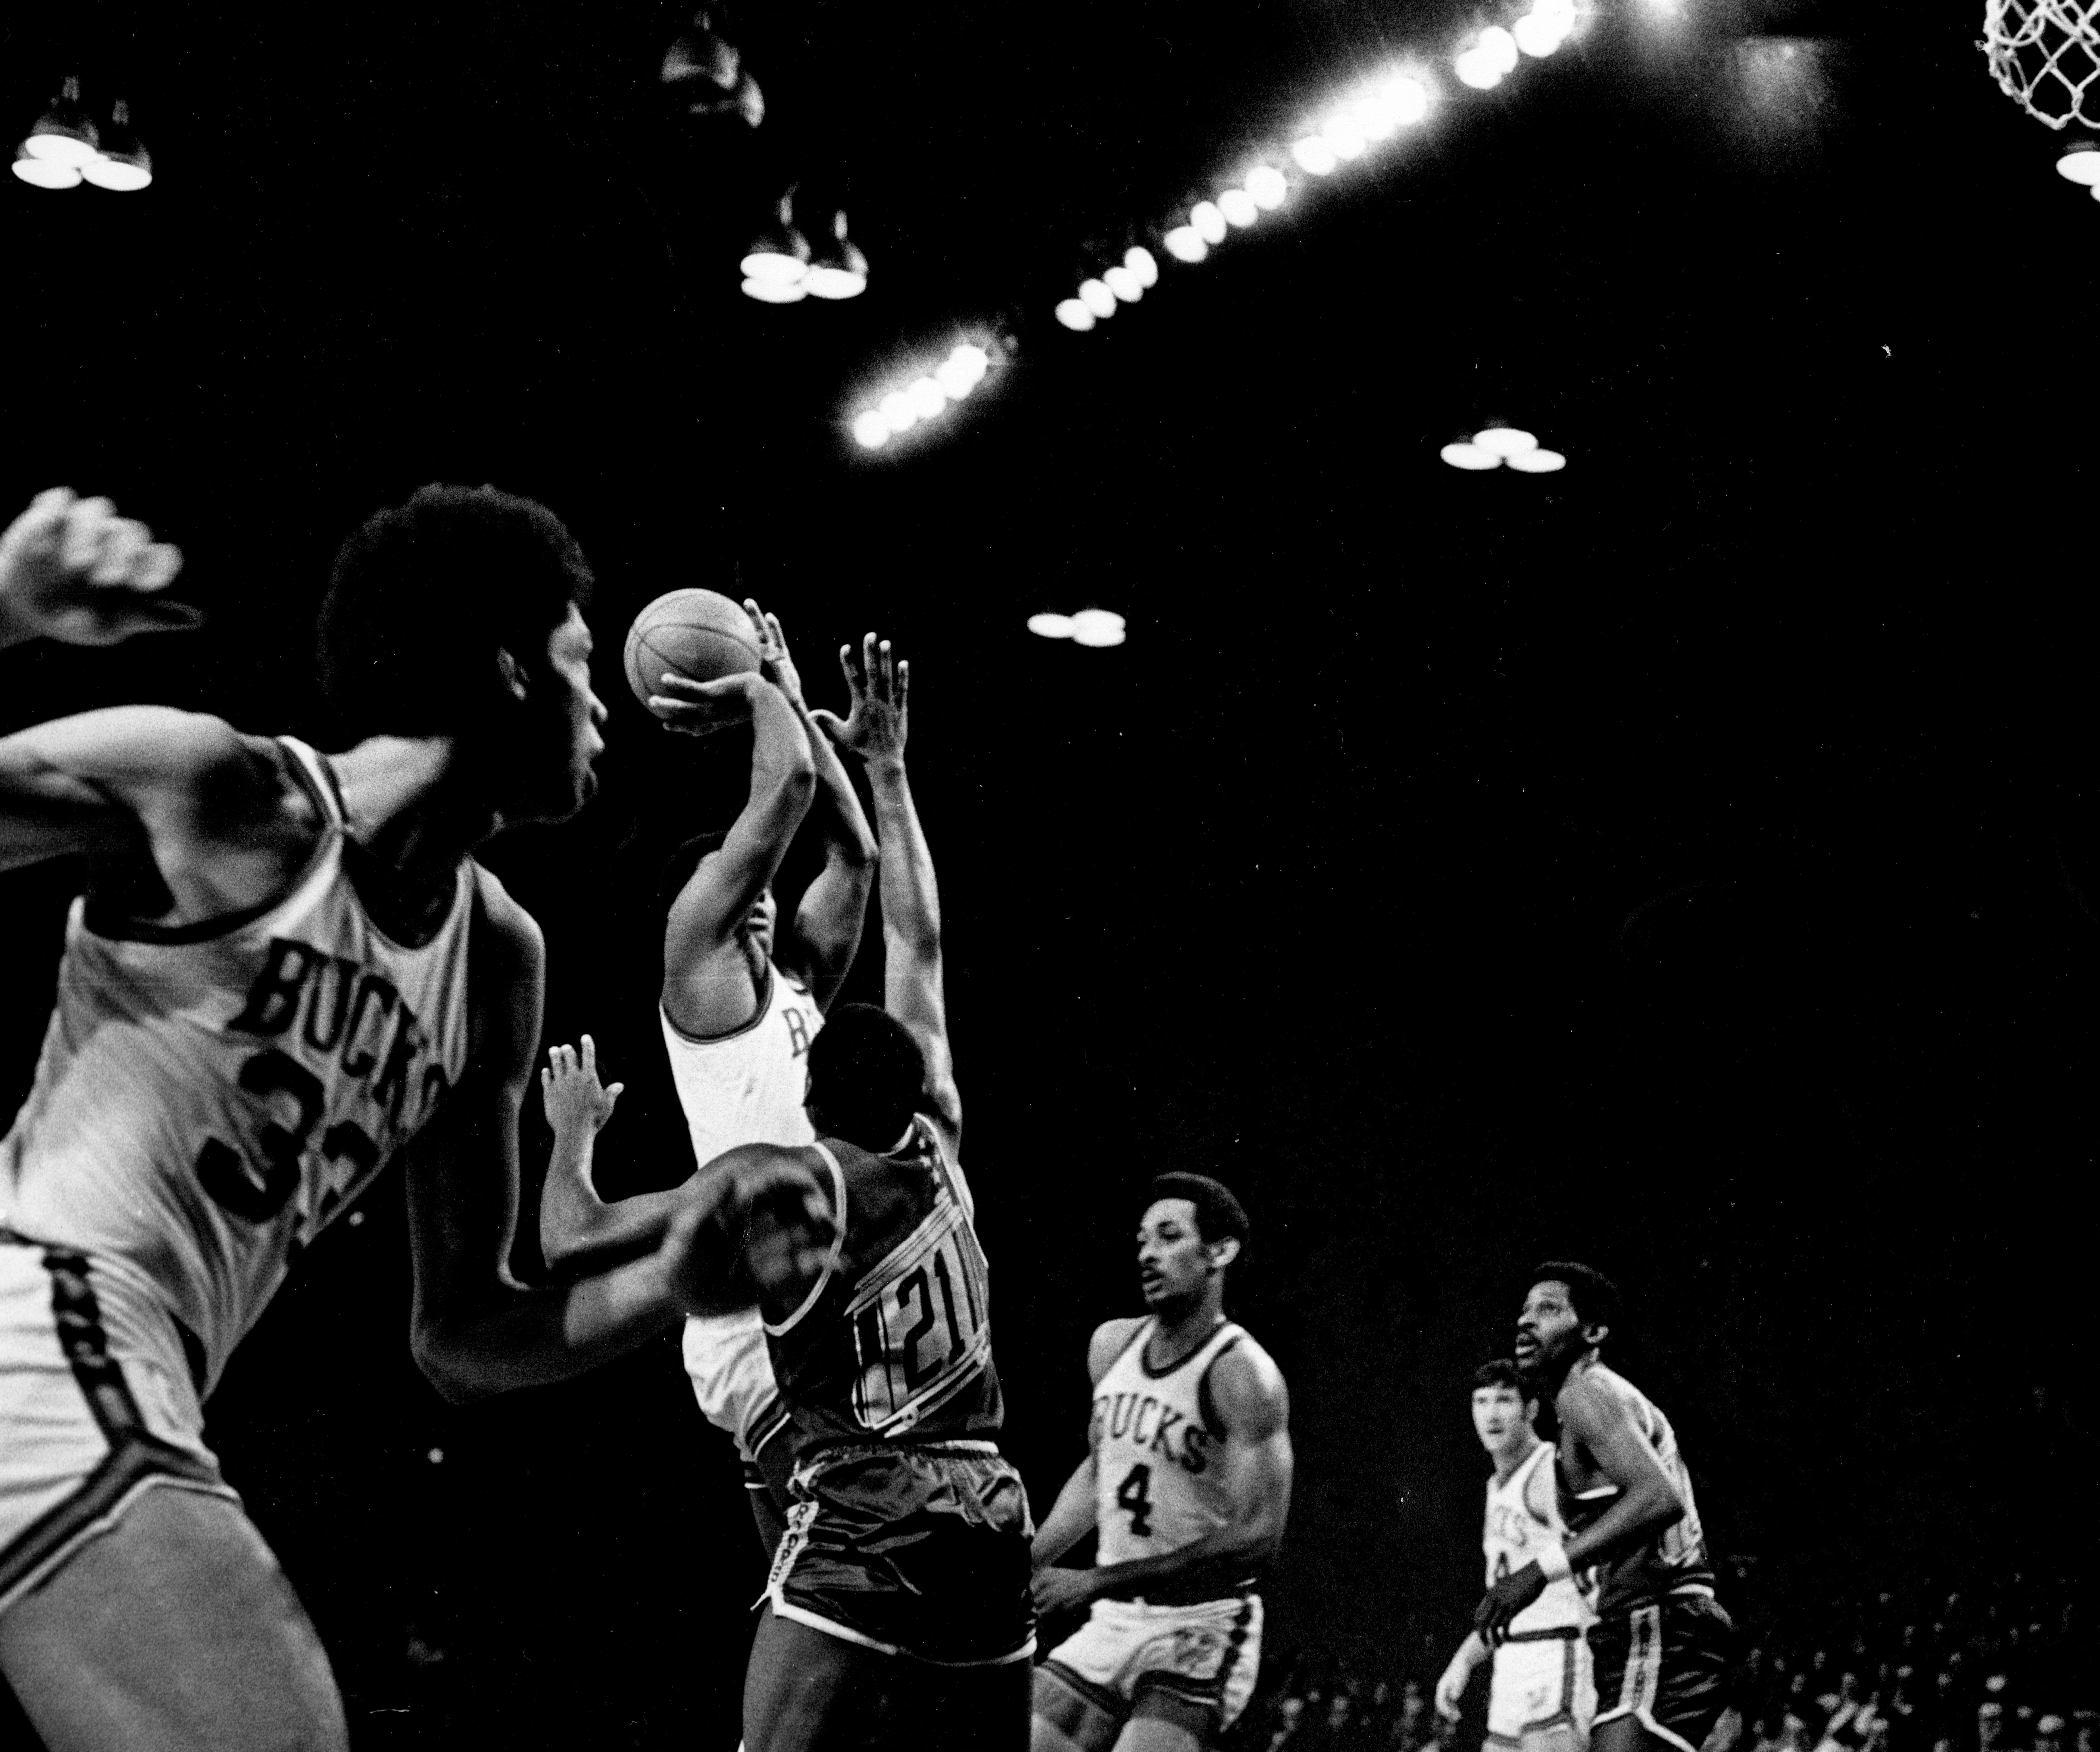 February 23, 1971, Milwaukee, Wisconsin, USA: LEW ALCINDOR, left, who changed his name to KAREEM ABDUL-JABBAR at the end of the season, watches as OSCAR ROBERTSON take a shot for the Milwaukee Bucks in their game against the San Francisco Warriors in Milw